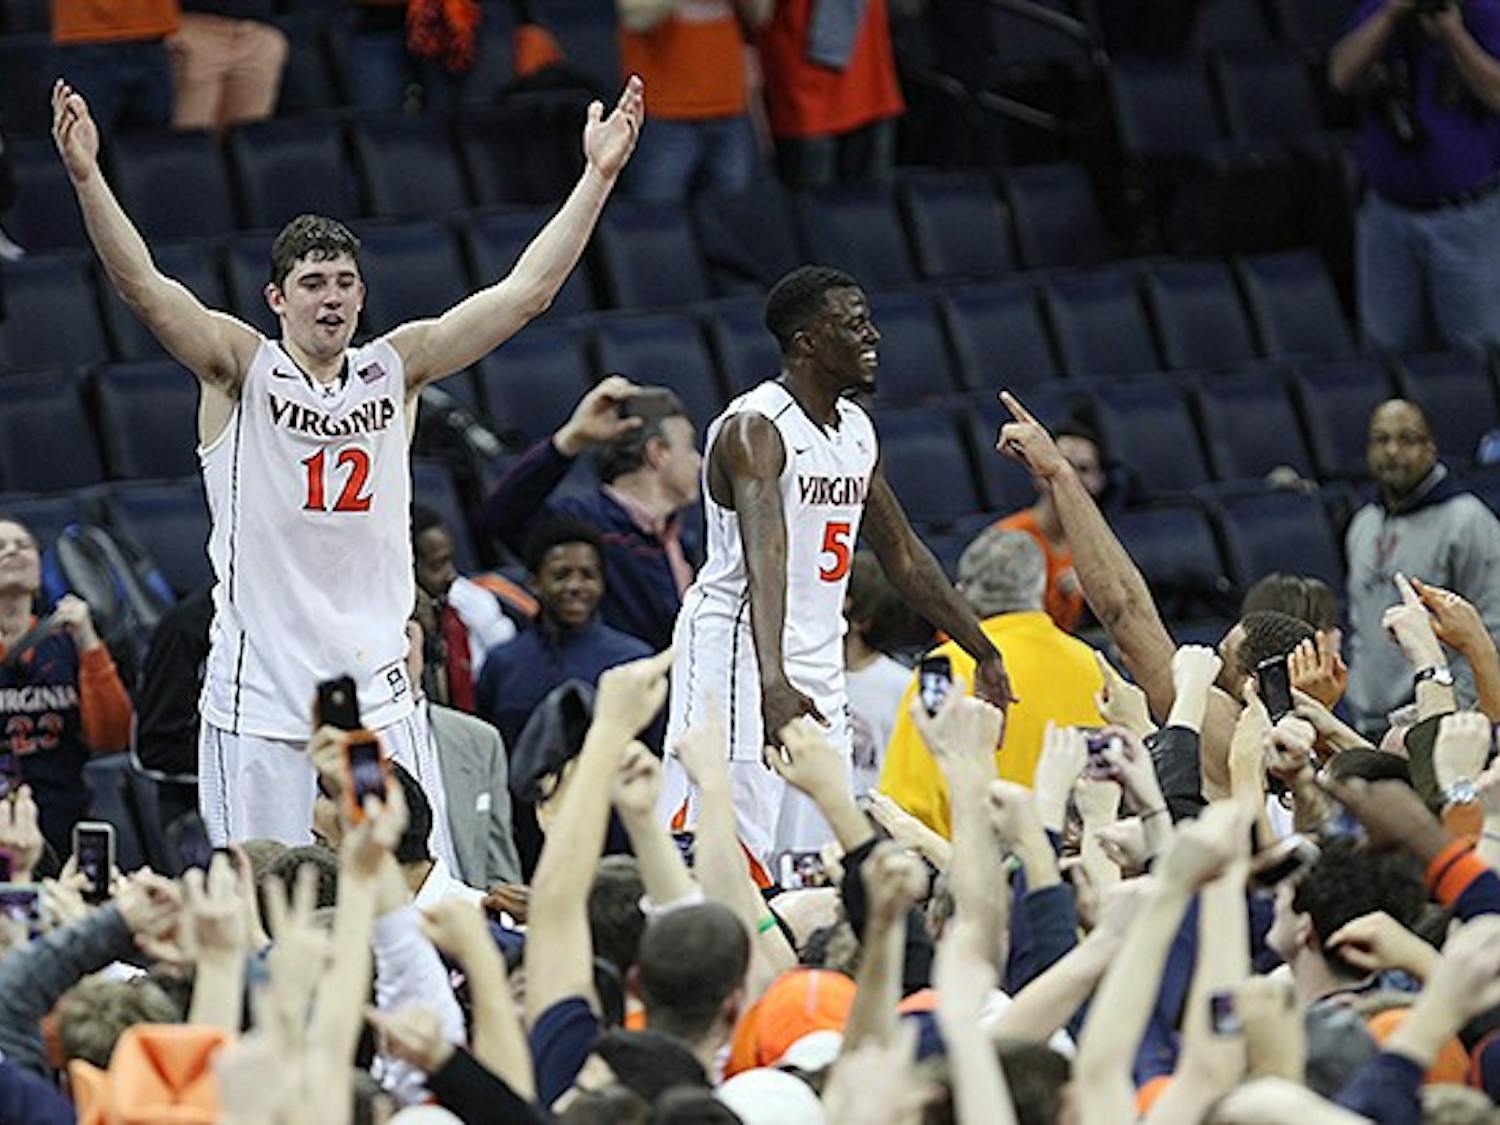 Joe Harris, left, celebrates with fans after scoring a career-high 36 points to lead Virginia to an upset win over No. 3 Duke.